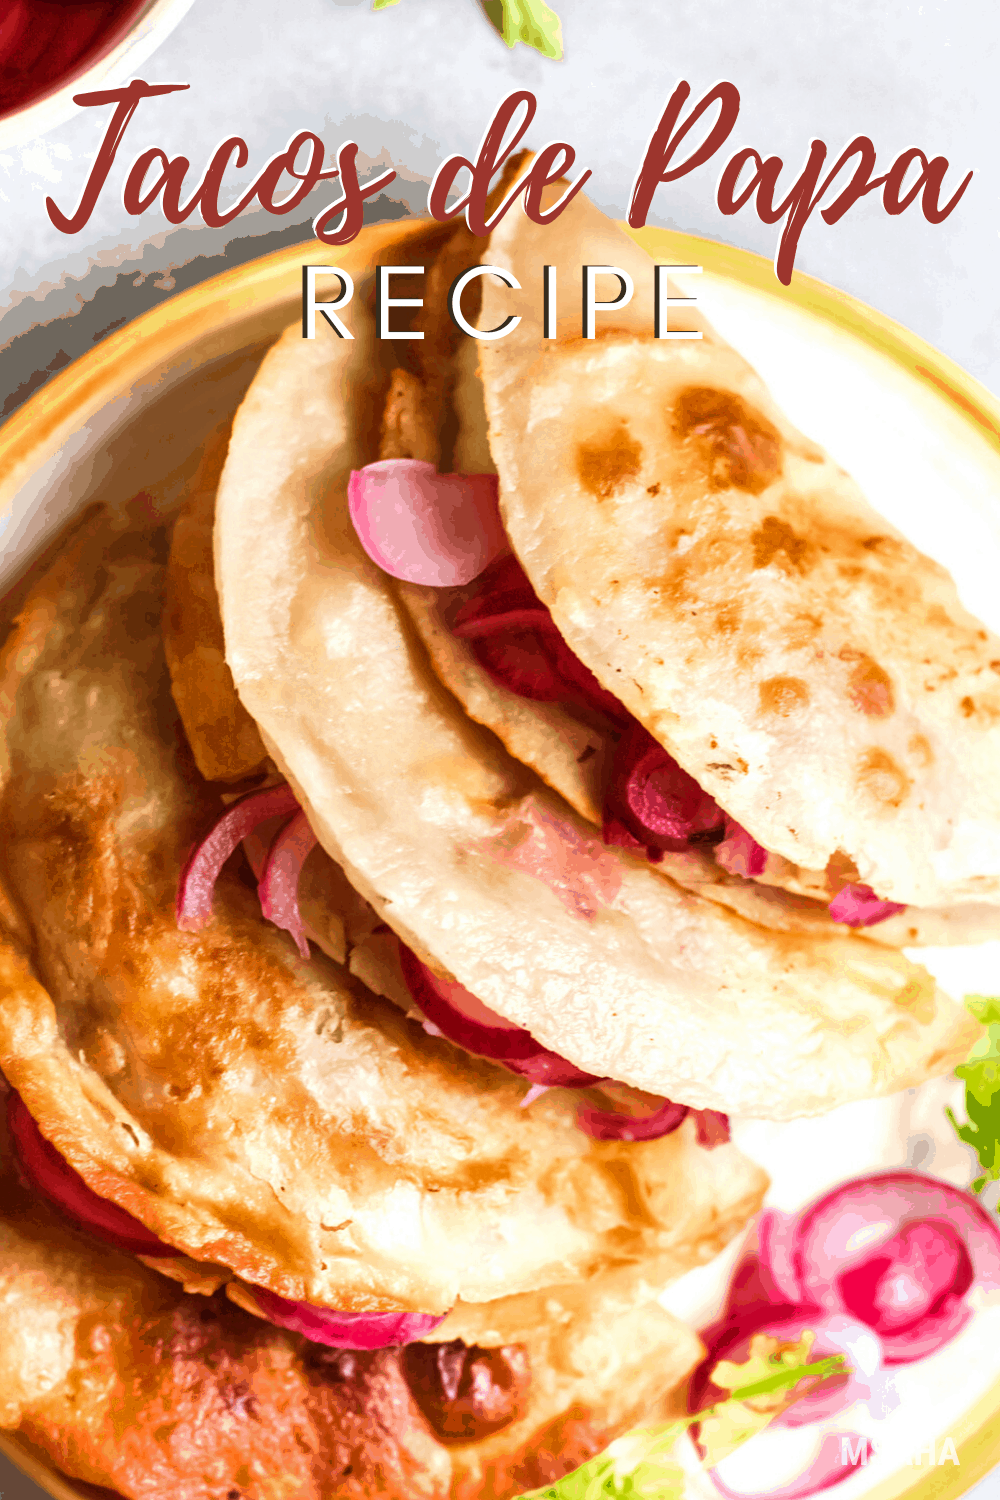 Tacos de papa are fried tacos filled with seasoned mashed potatoes, pickled red onions, cotija cheese. You can top with tomatoes, sour cream, and more. via @mystayathome